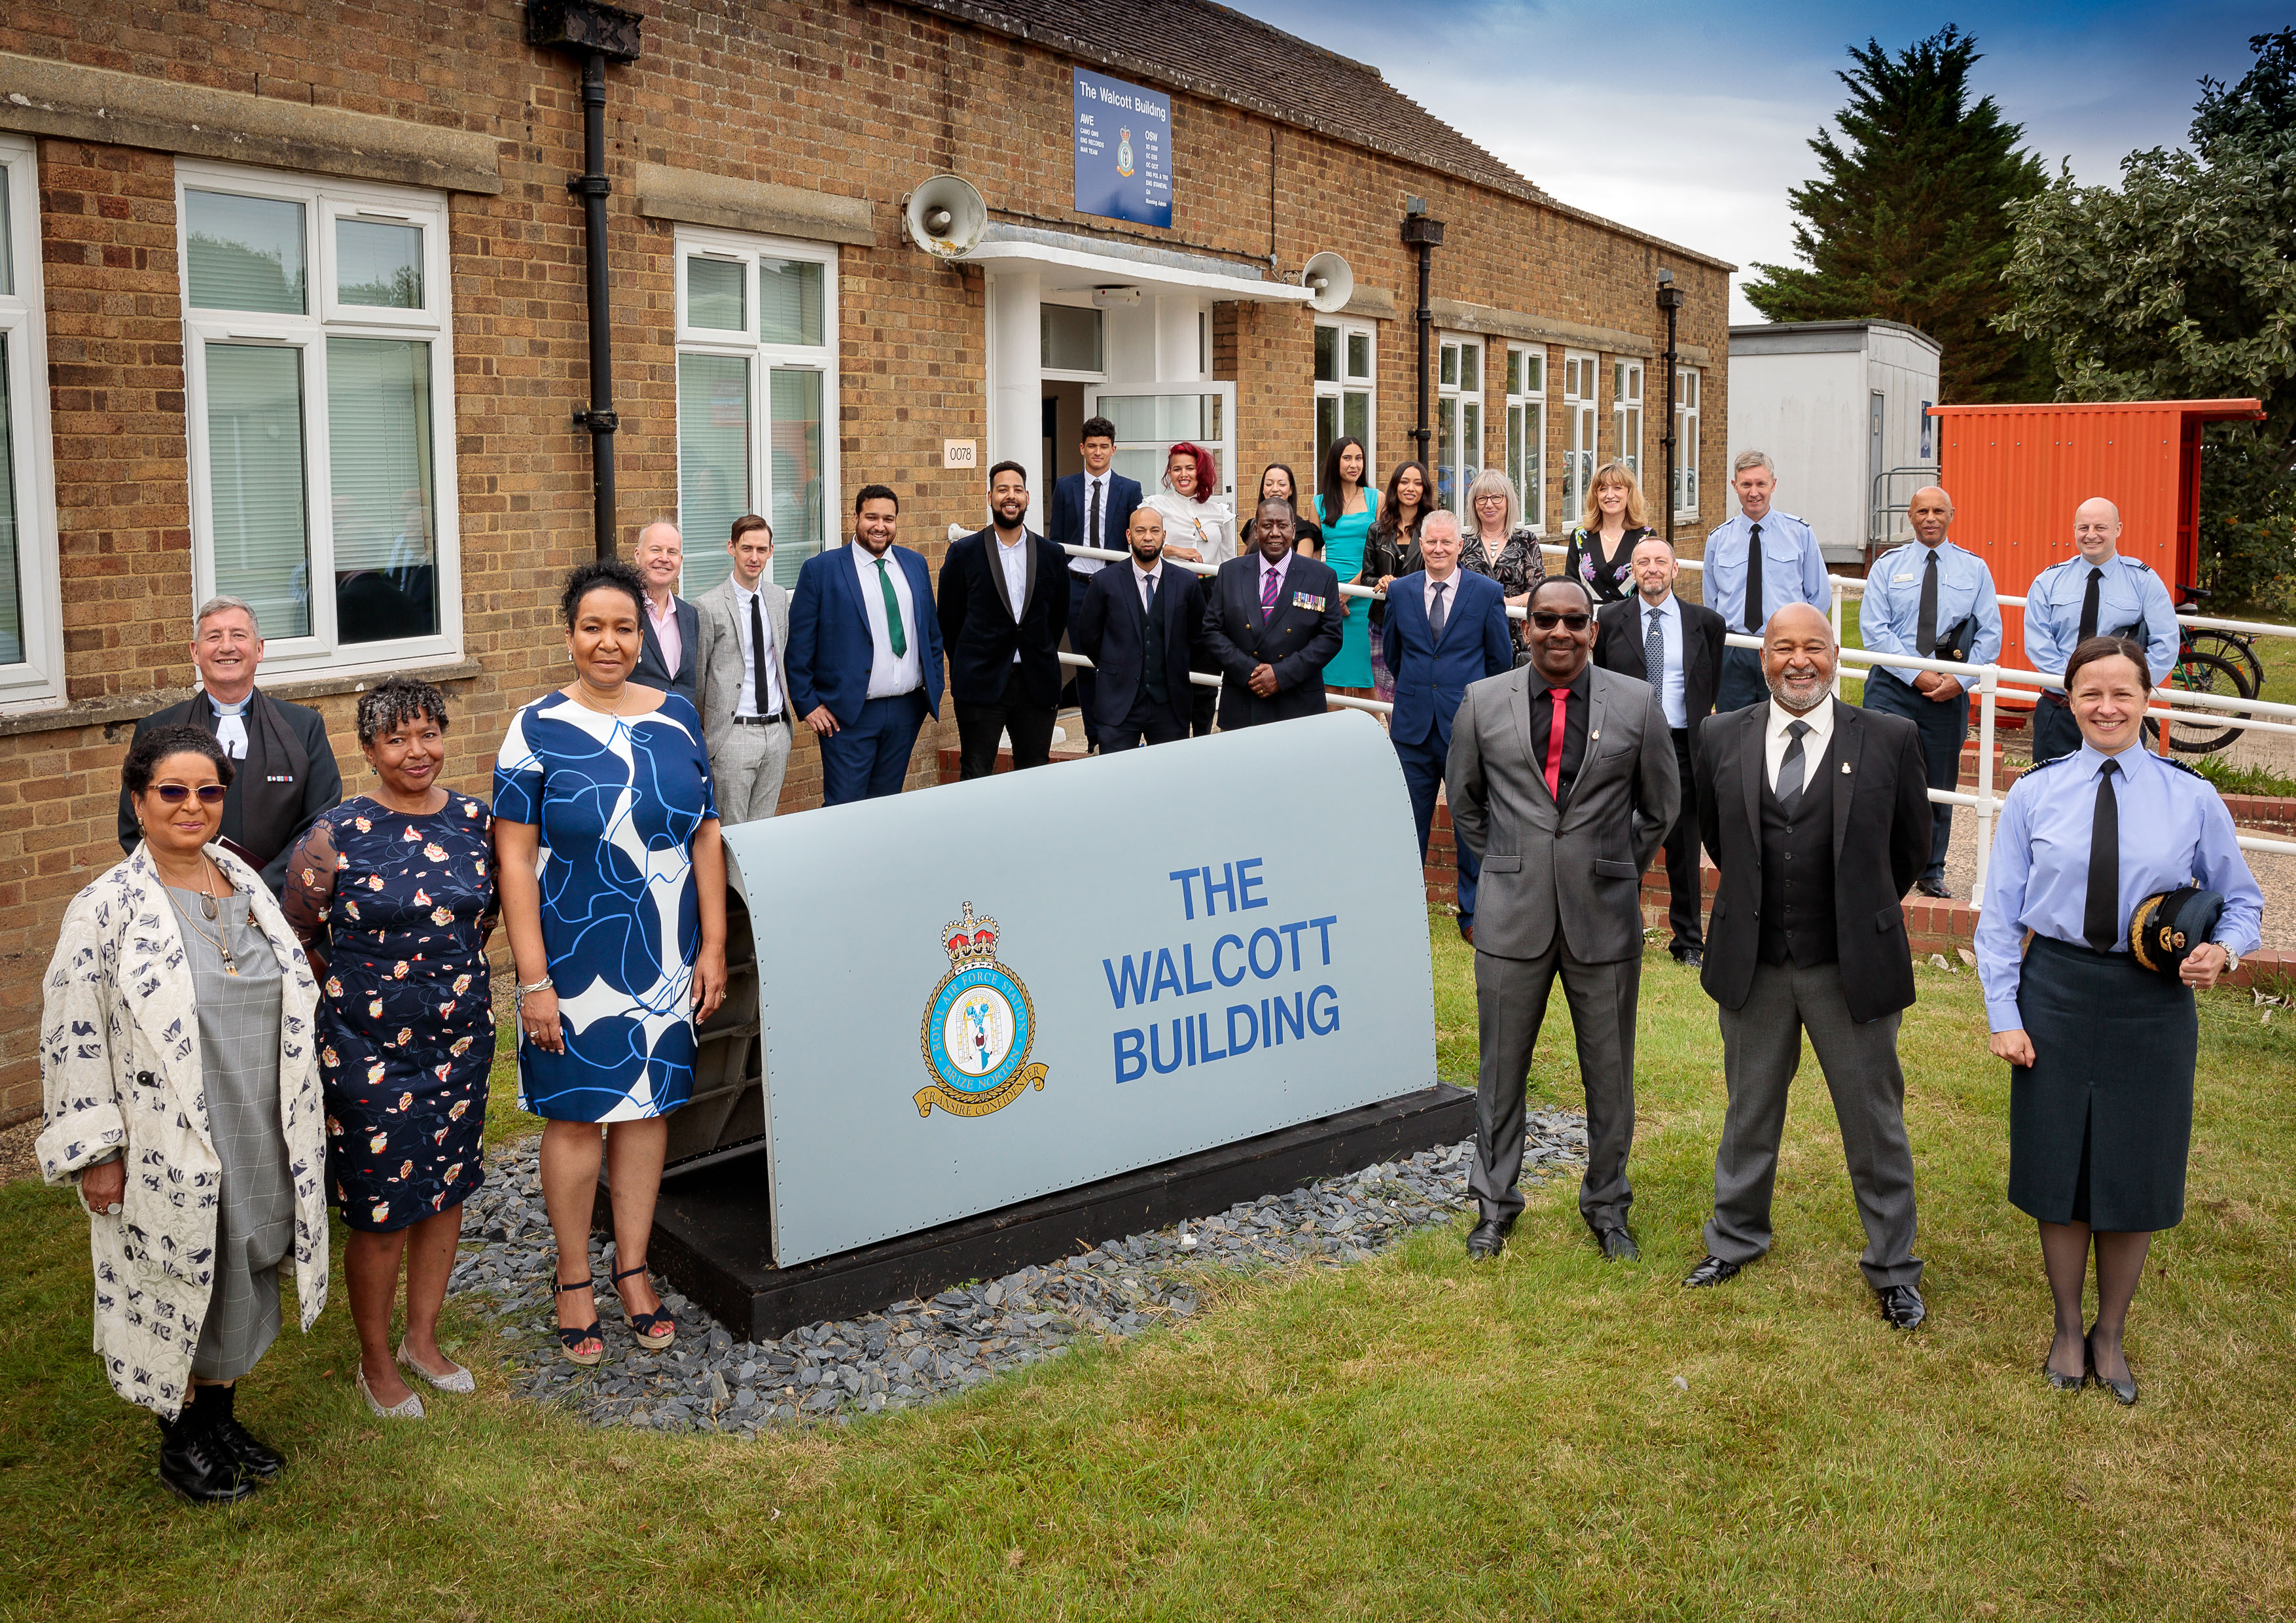 Warrant Officer Windell ‘Joe’ Walcott’s name will forever be remembered at RAF Brize Norton, as Building 78 has been renamed, ‘The Walcott Building’.